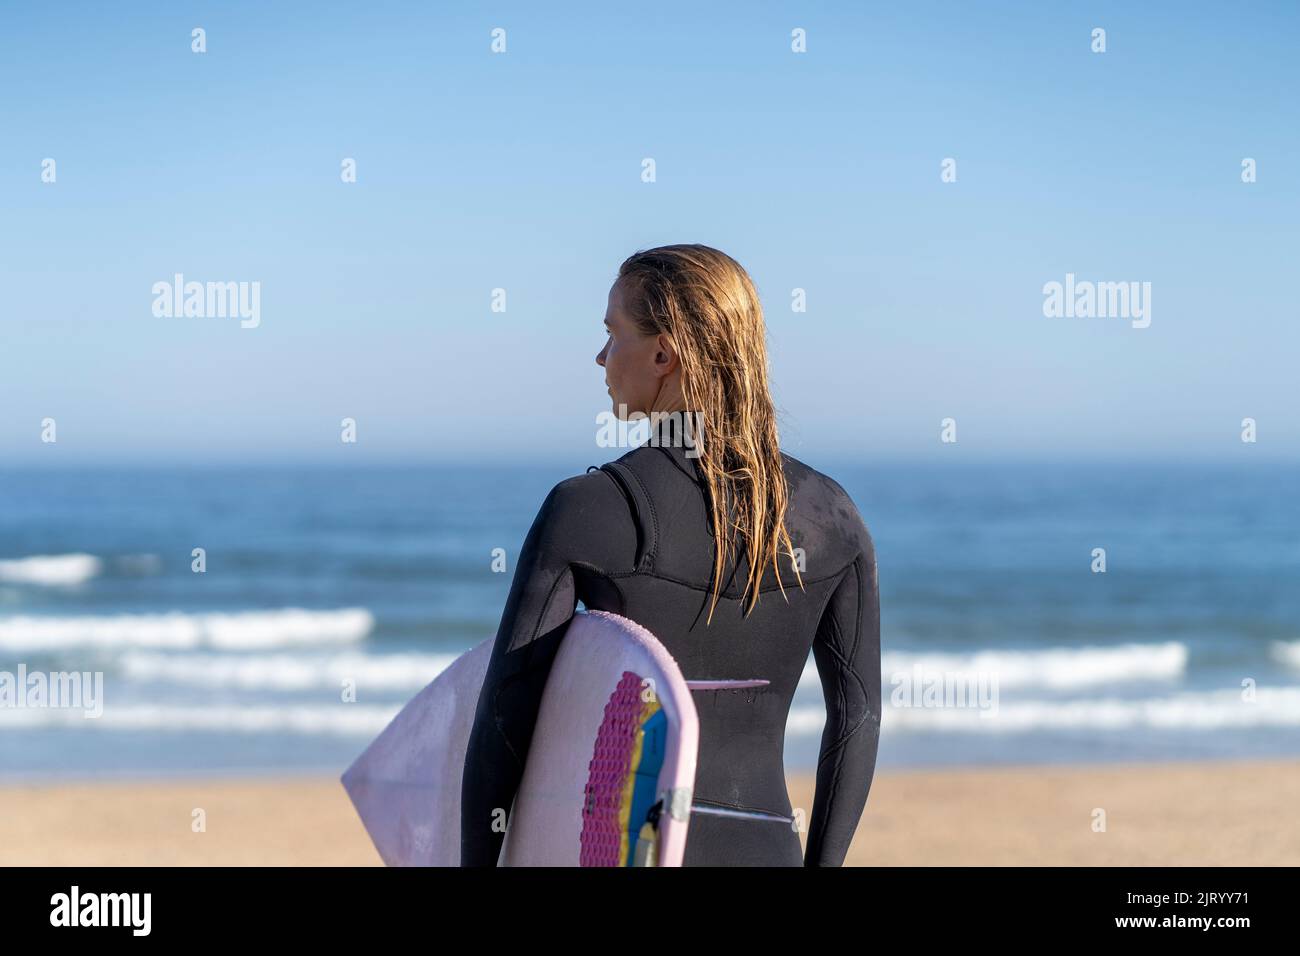 Surfer girl at the beach with her surfboard looking at the ocean waves in the morning. Stock Photo